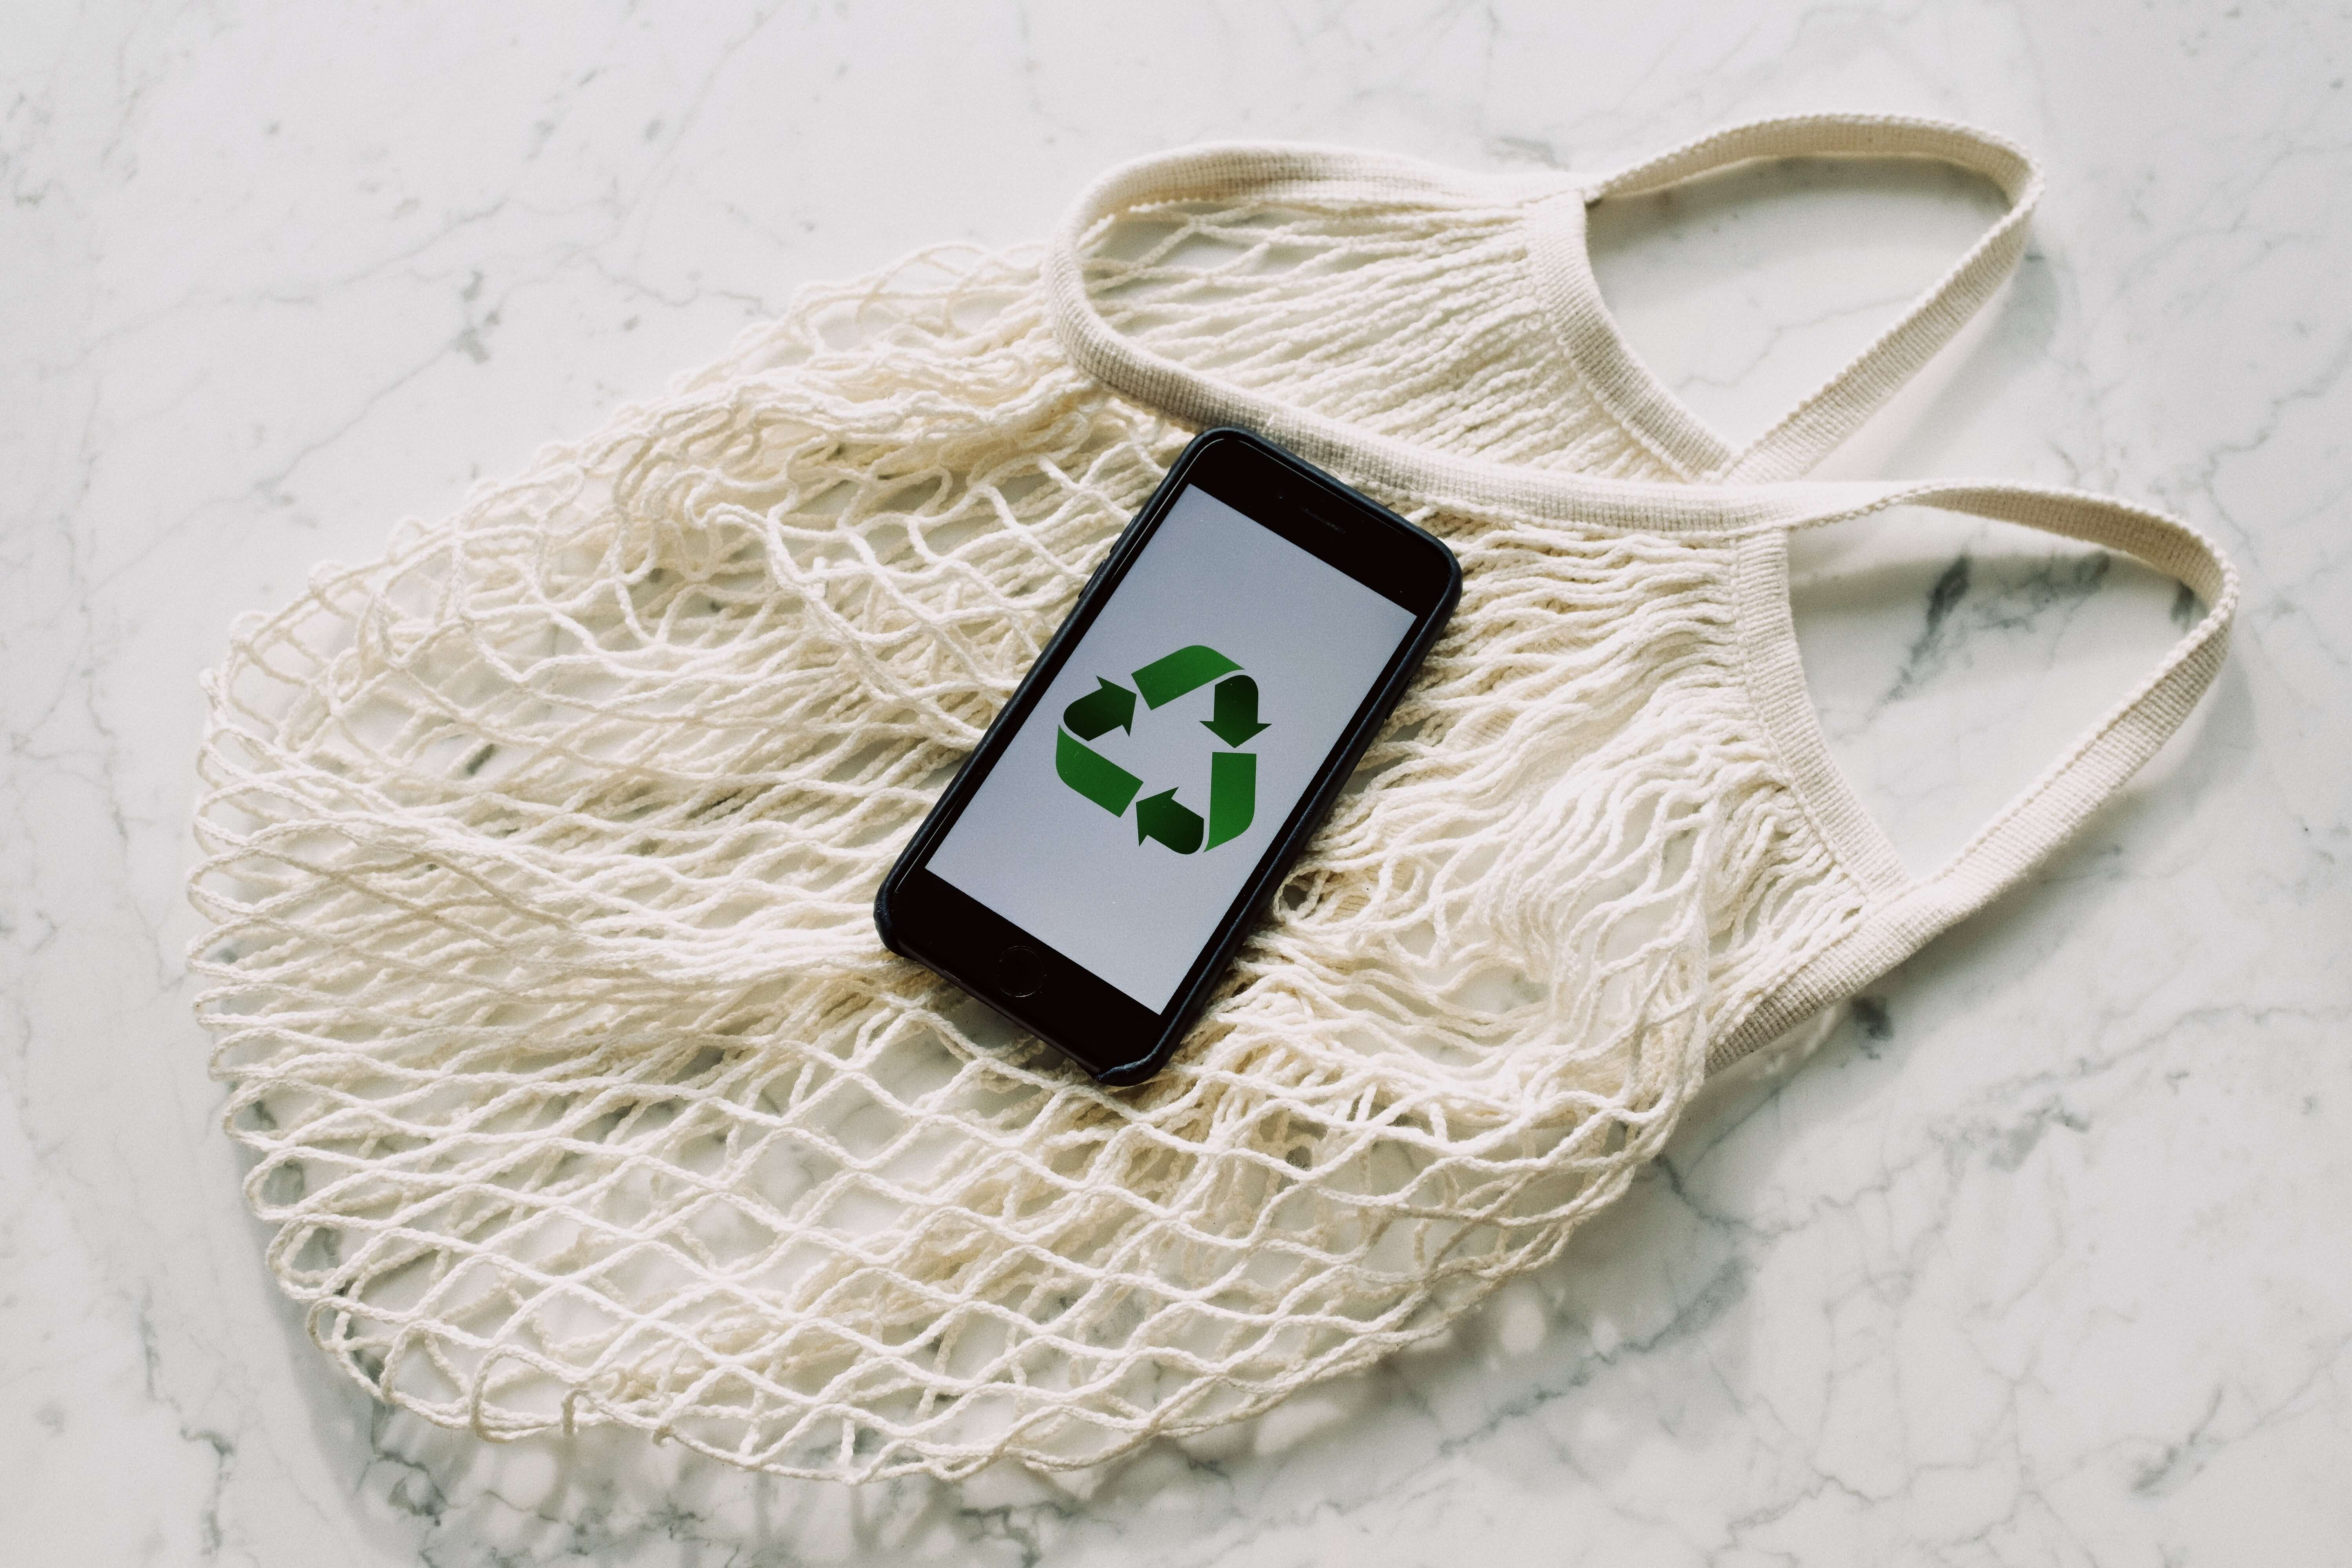 An image featuring a cloth bag with a phone resting on top of it, accompanied by the universally recognized symbol for recycling, representing the concept of environmentally conscious practices and the integration of technology in sustainable living.